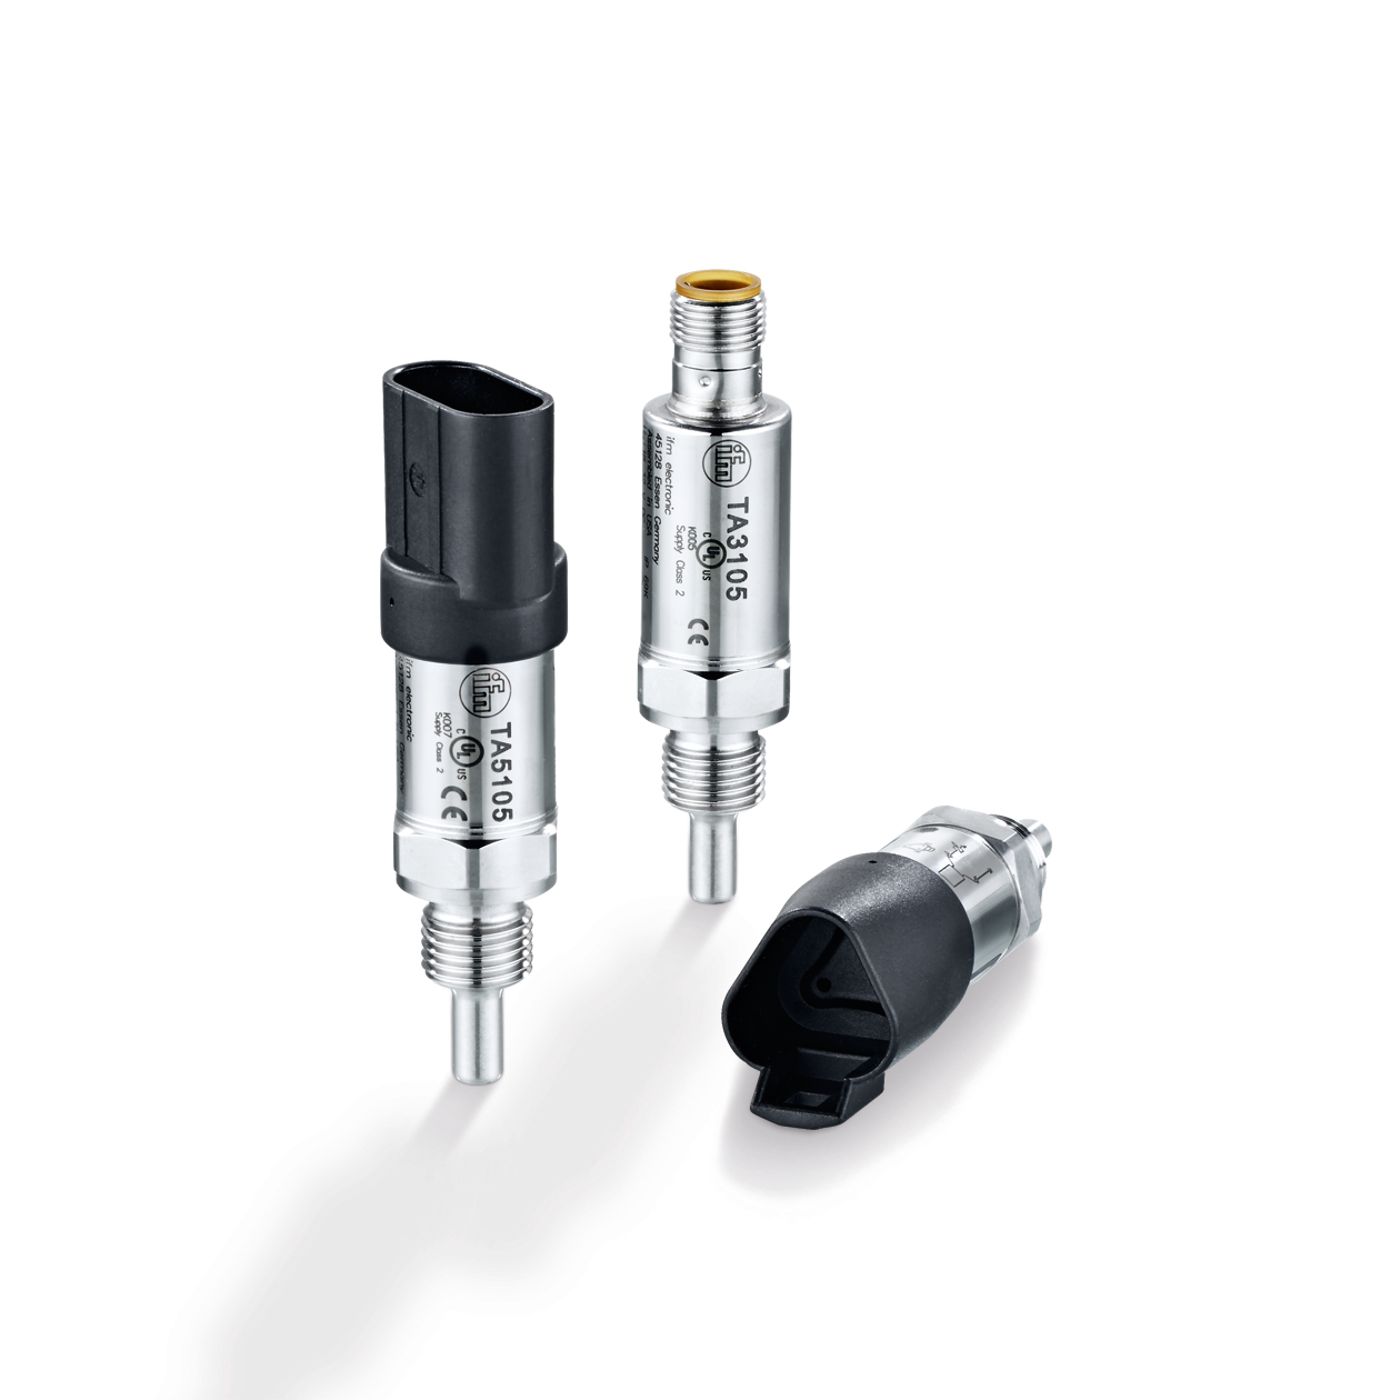 Compact transmitters for mobile machines